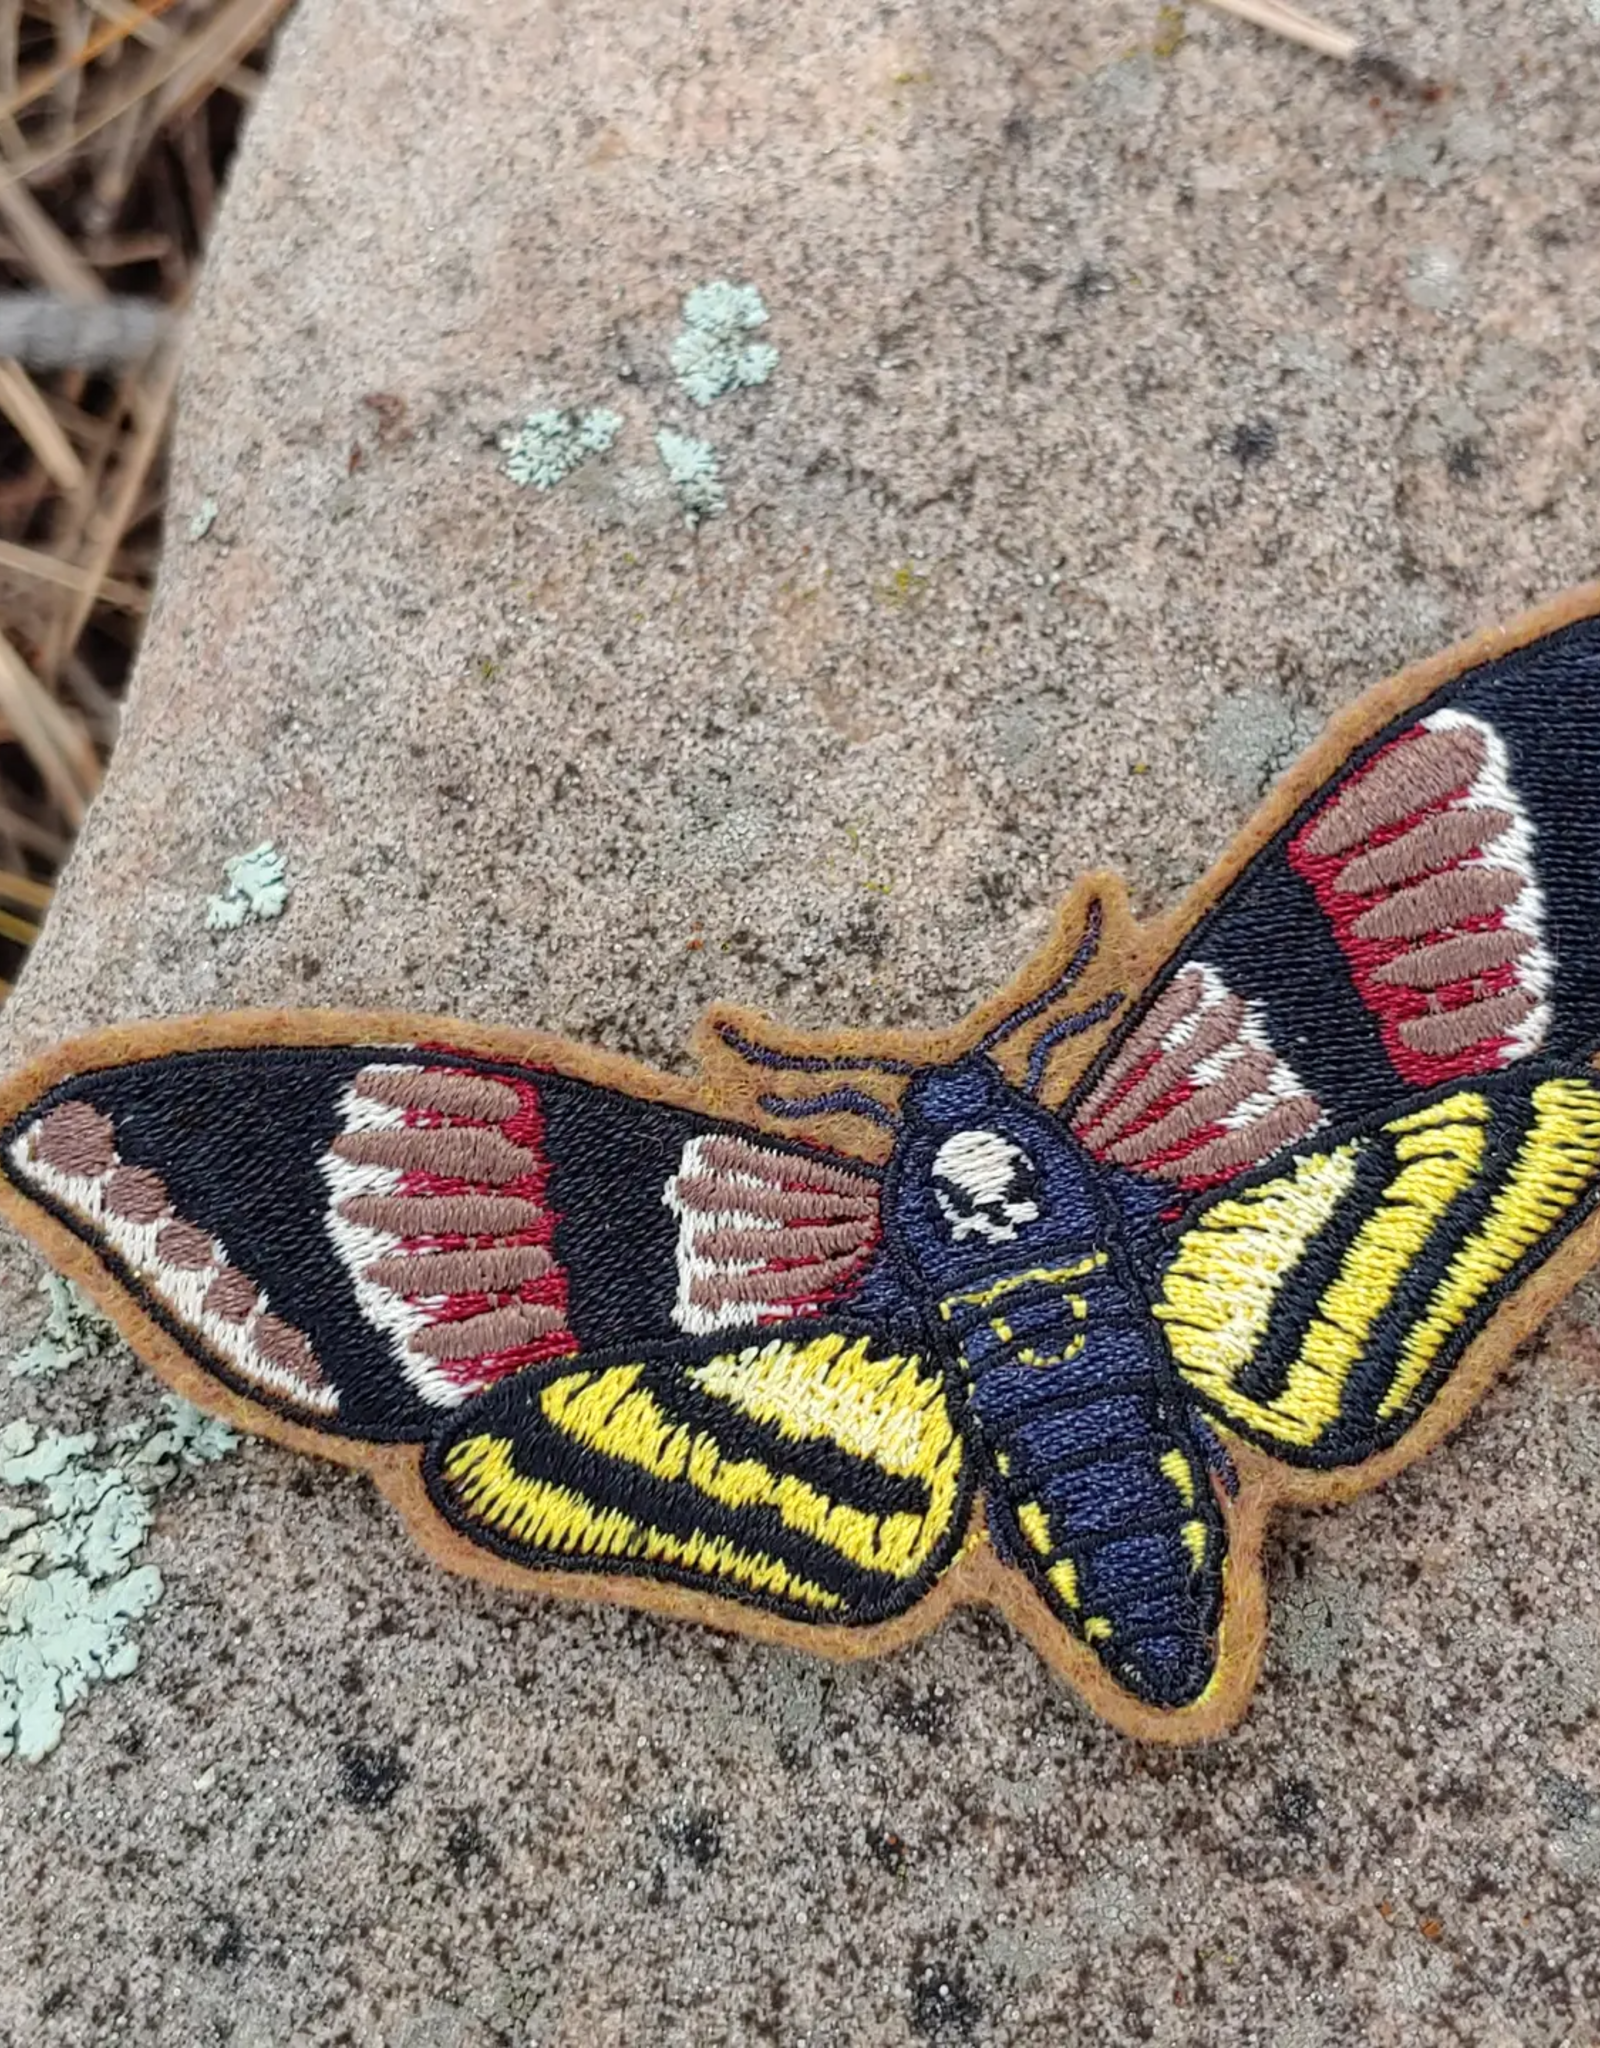 Death Head Hawkmoth Embroidered Iron On Patch